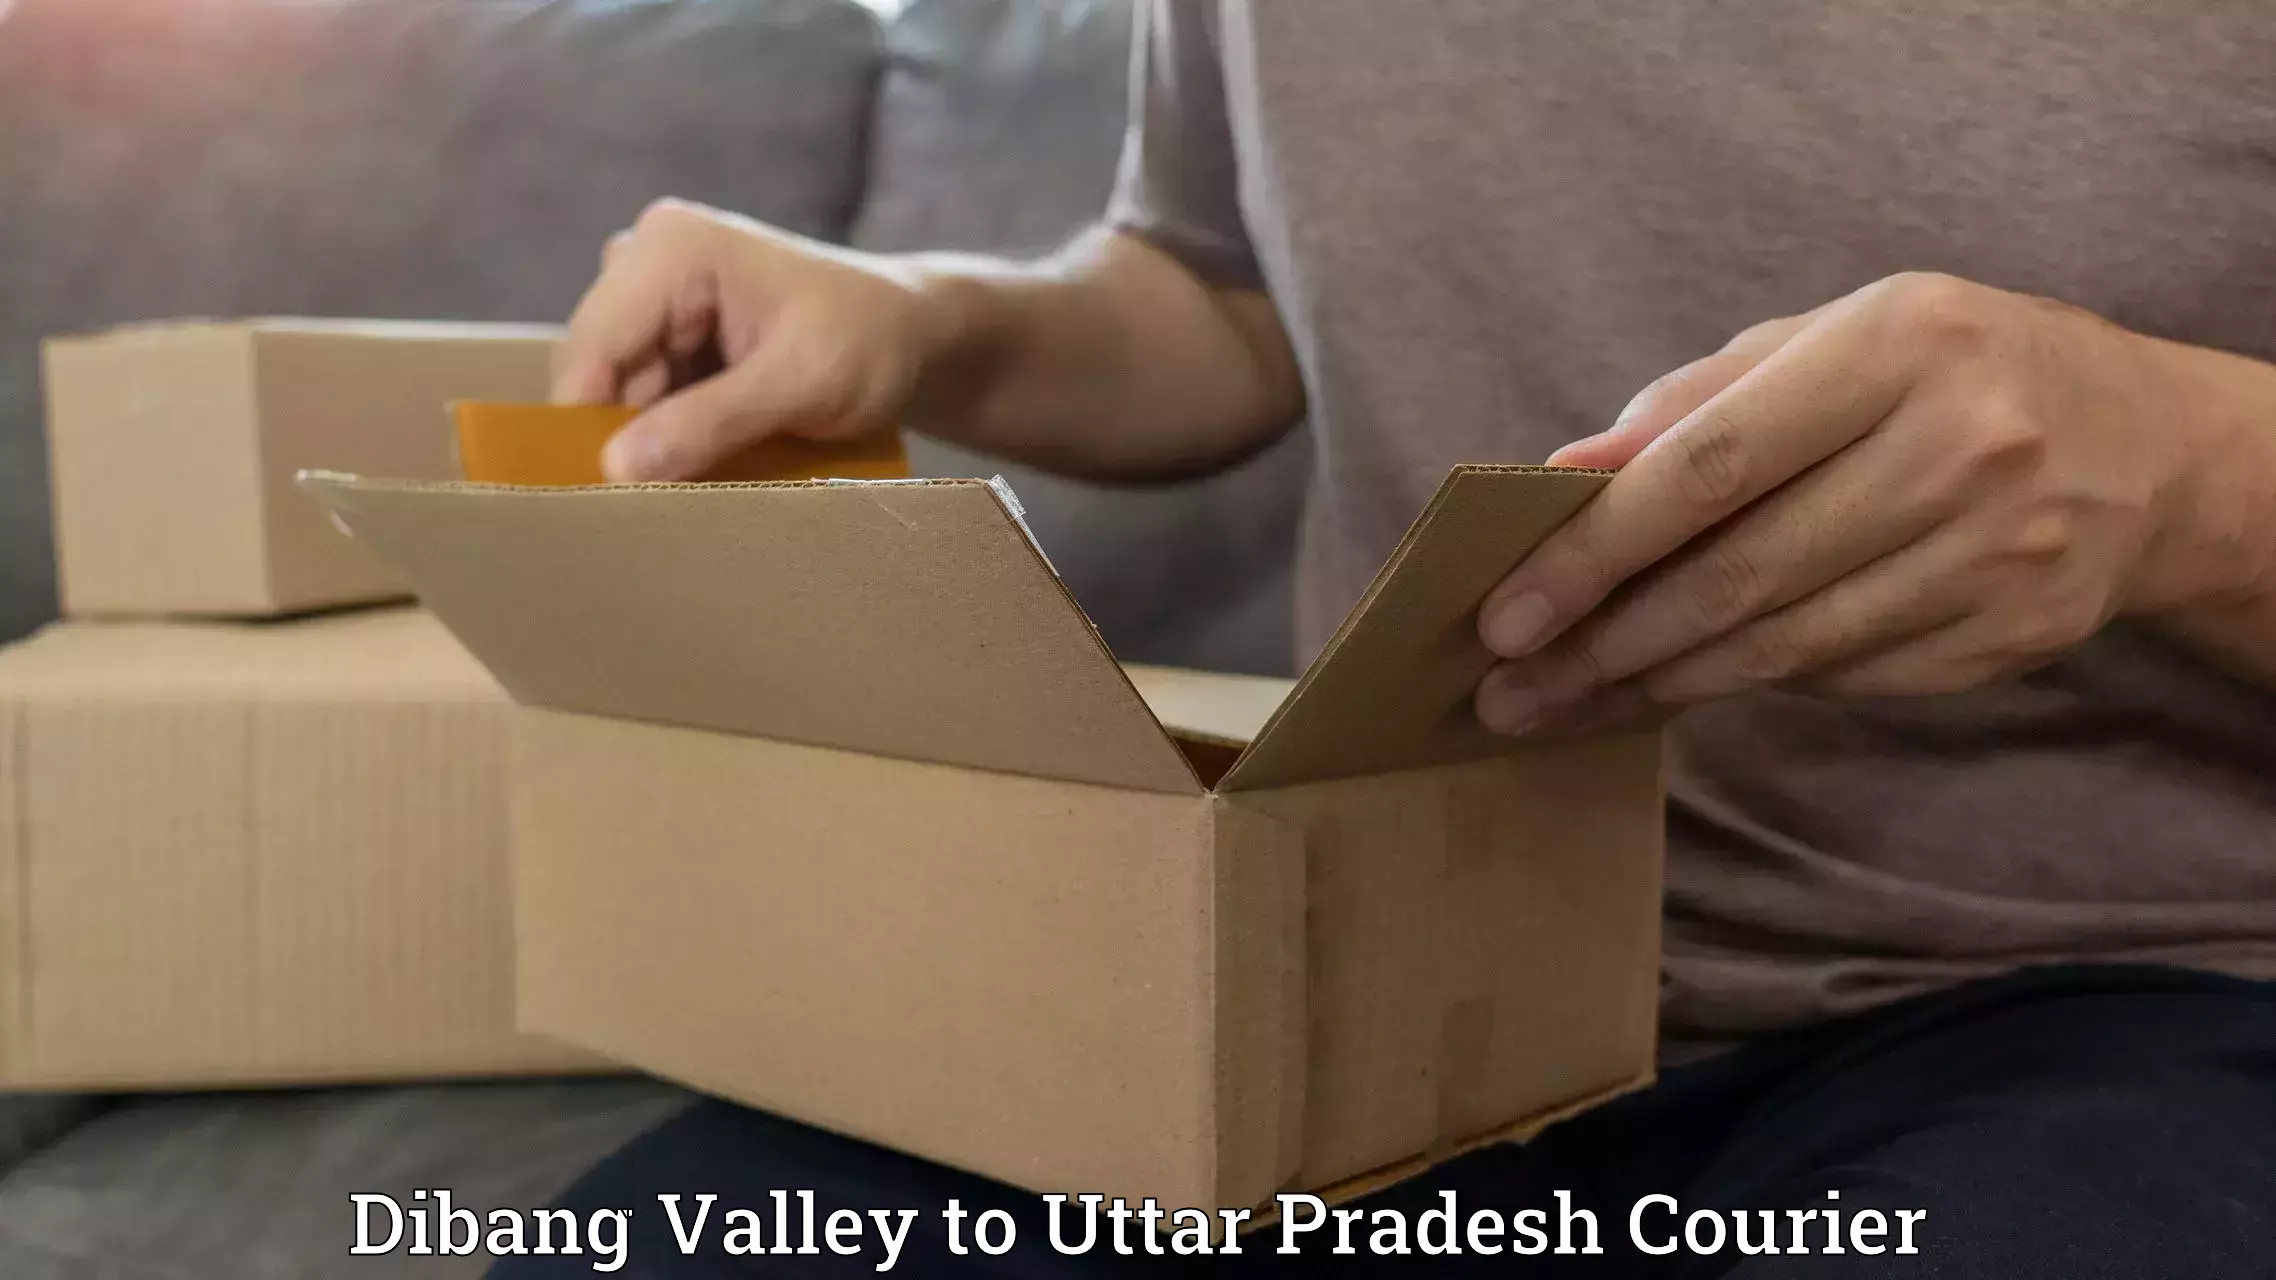 Courier insurance Dibang Valley to Gosainganj